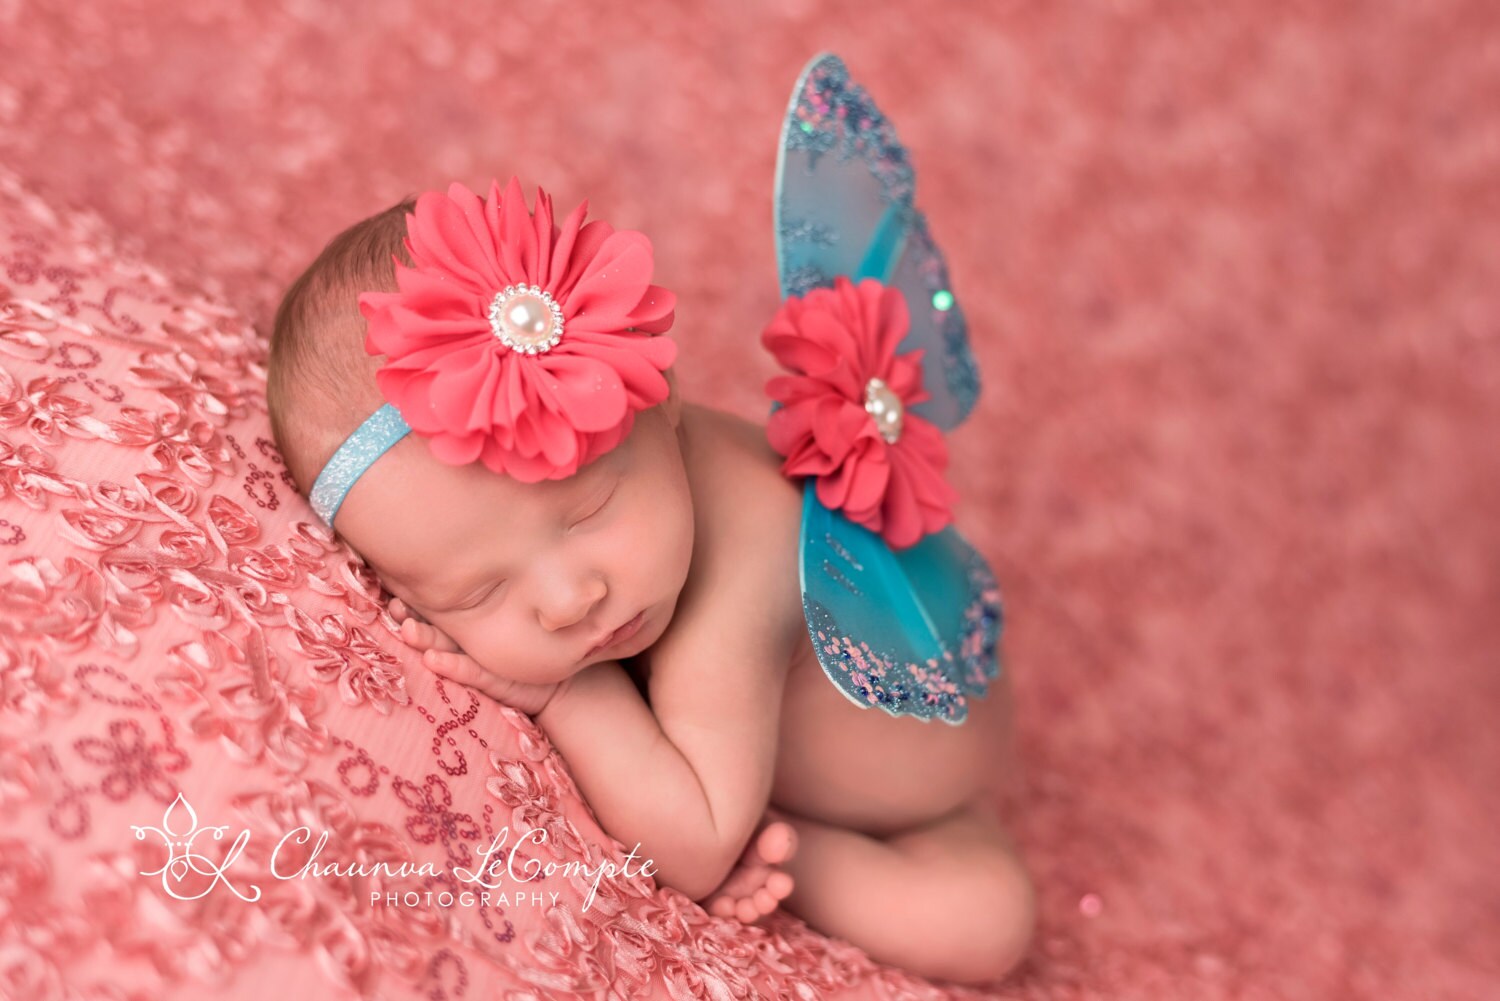 Turquoise and Coral Butterfly Wing Set / Infant Wings / Newborn Wing Prop / Baby Girl Headband / Newborn Photo Prop / Newborn Butterfly Wing